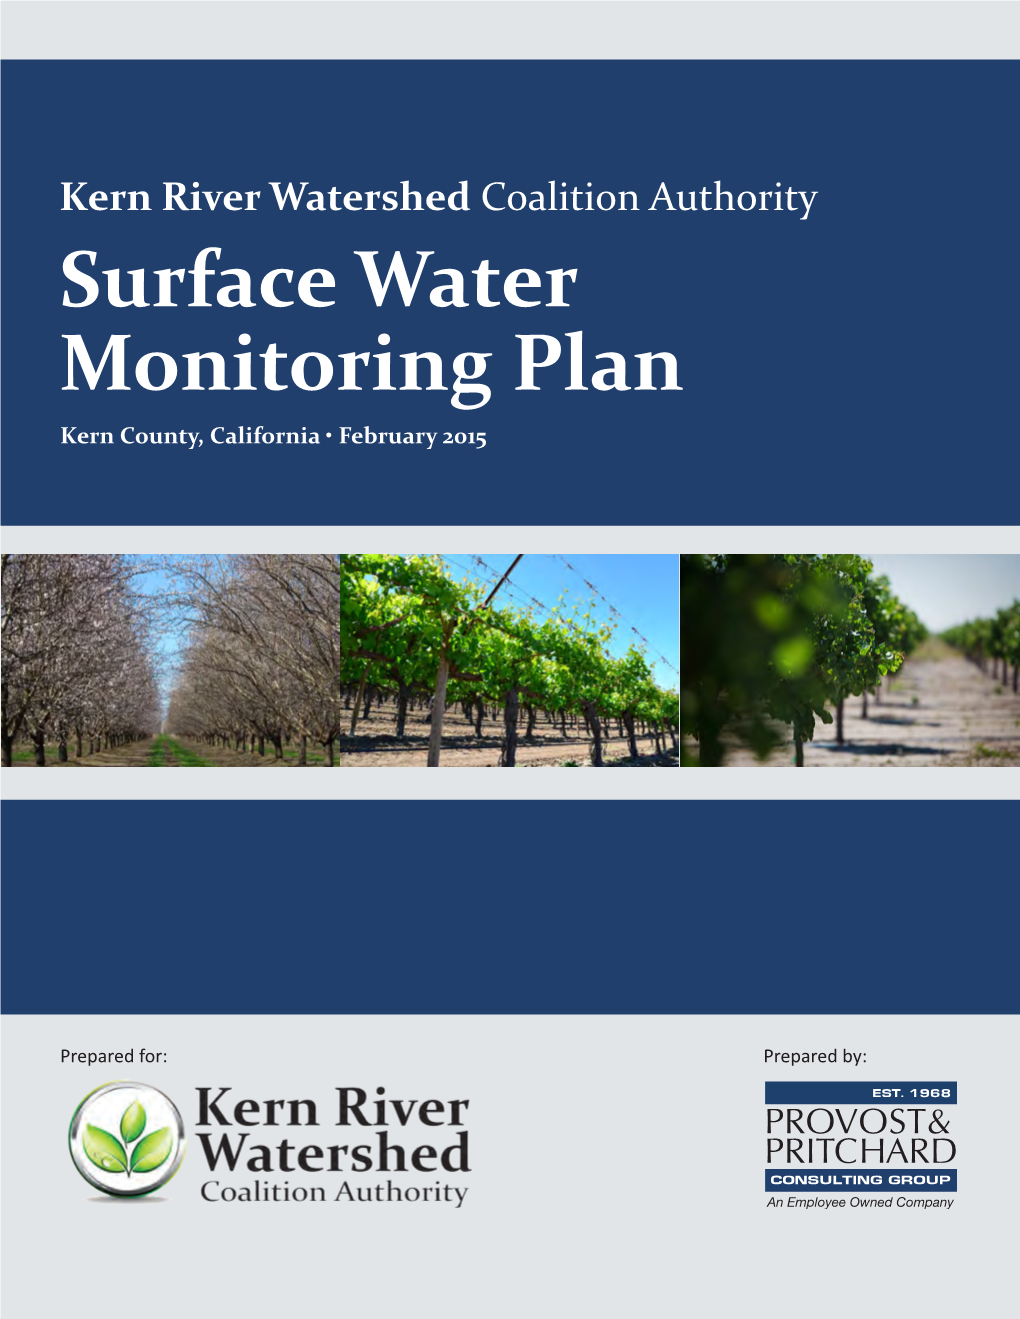 Surface Water Monitoring Plan (SWMP) As Required Under the Regional Board Order No